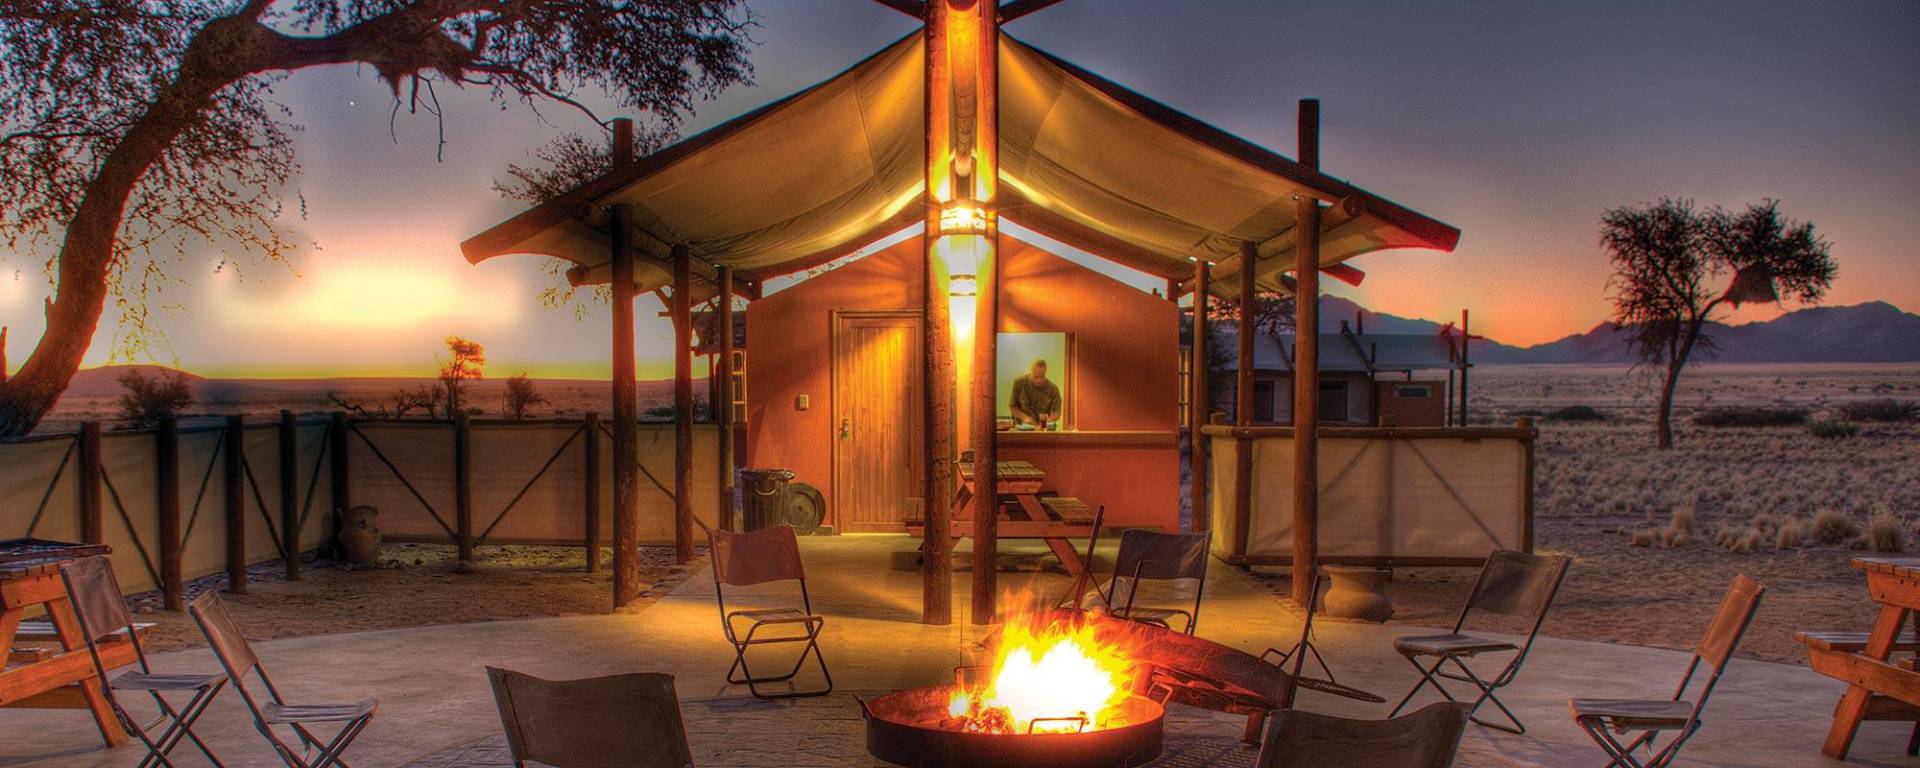 Exclusive accommodation in the Namib